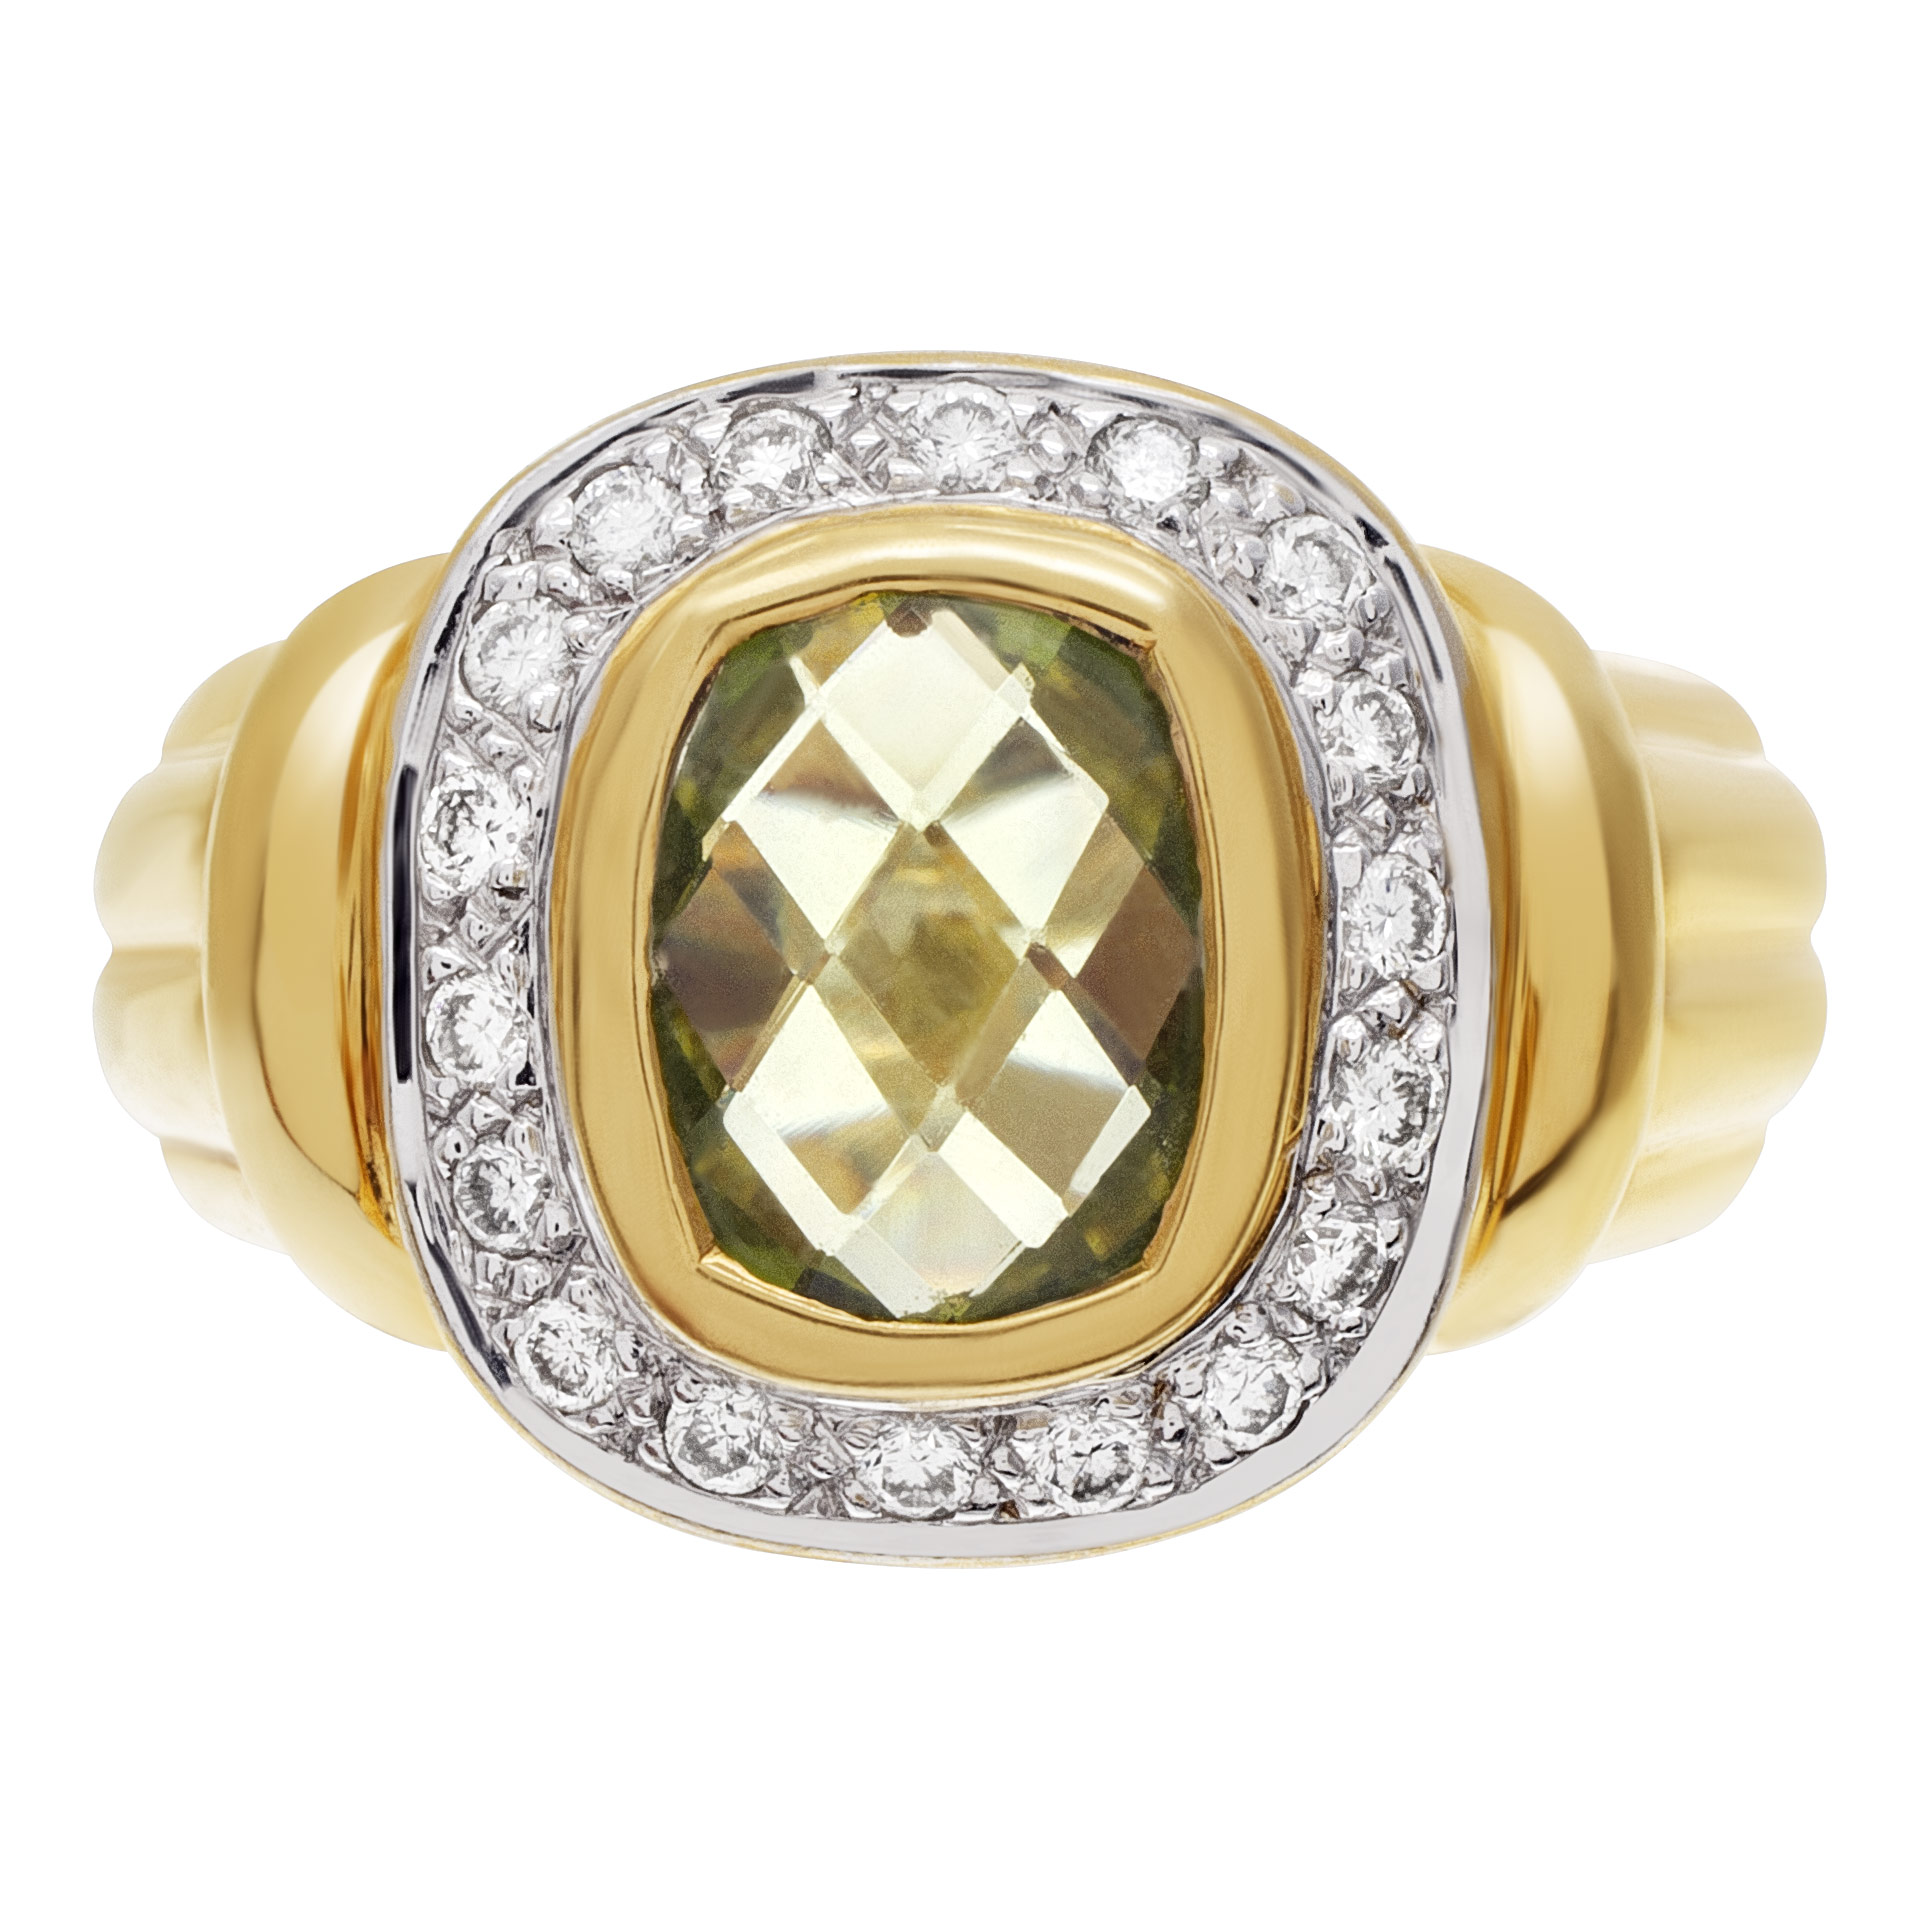 Diamond Ring with center Peridot stone in 18k yellow gold approx. 072 Carats in Diamonds